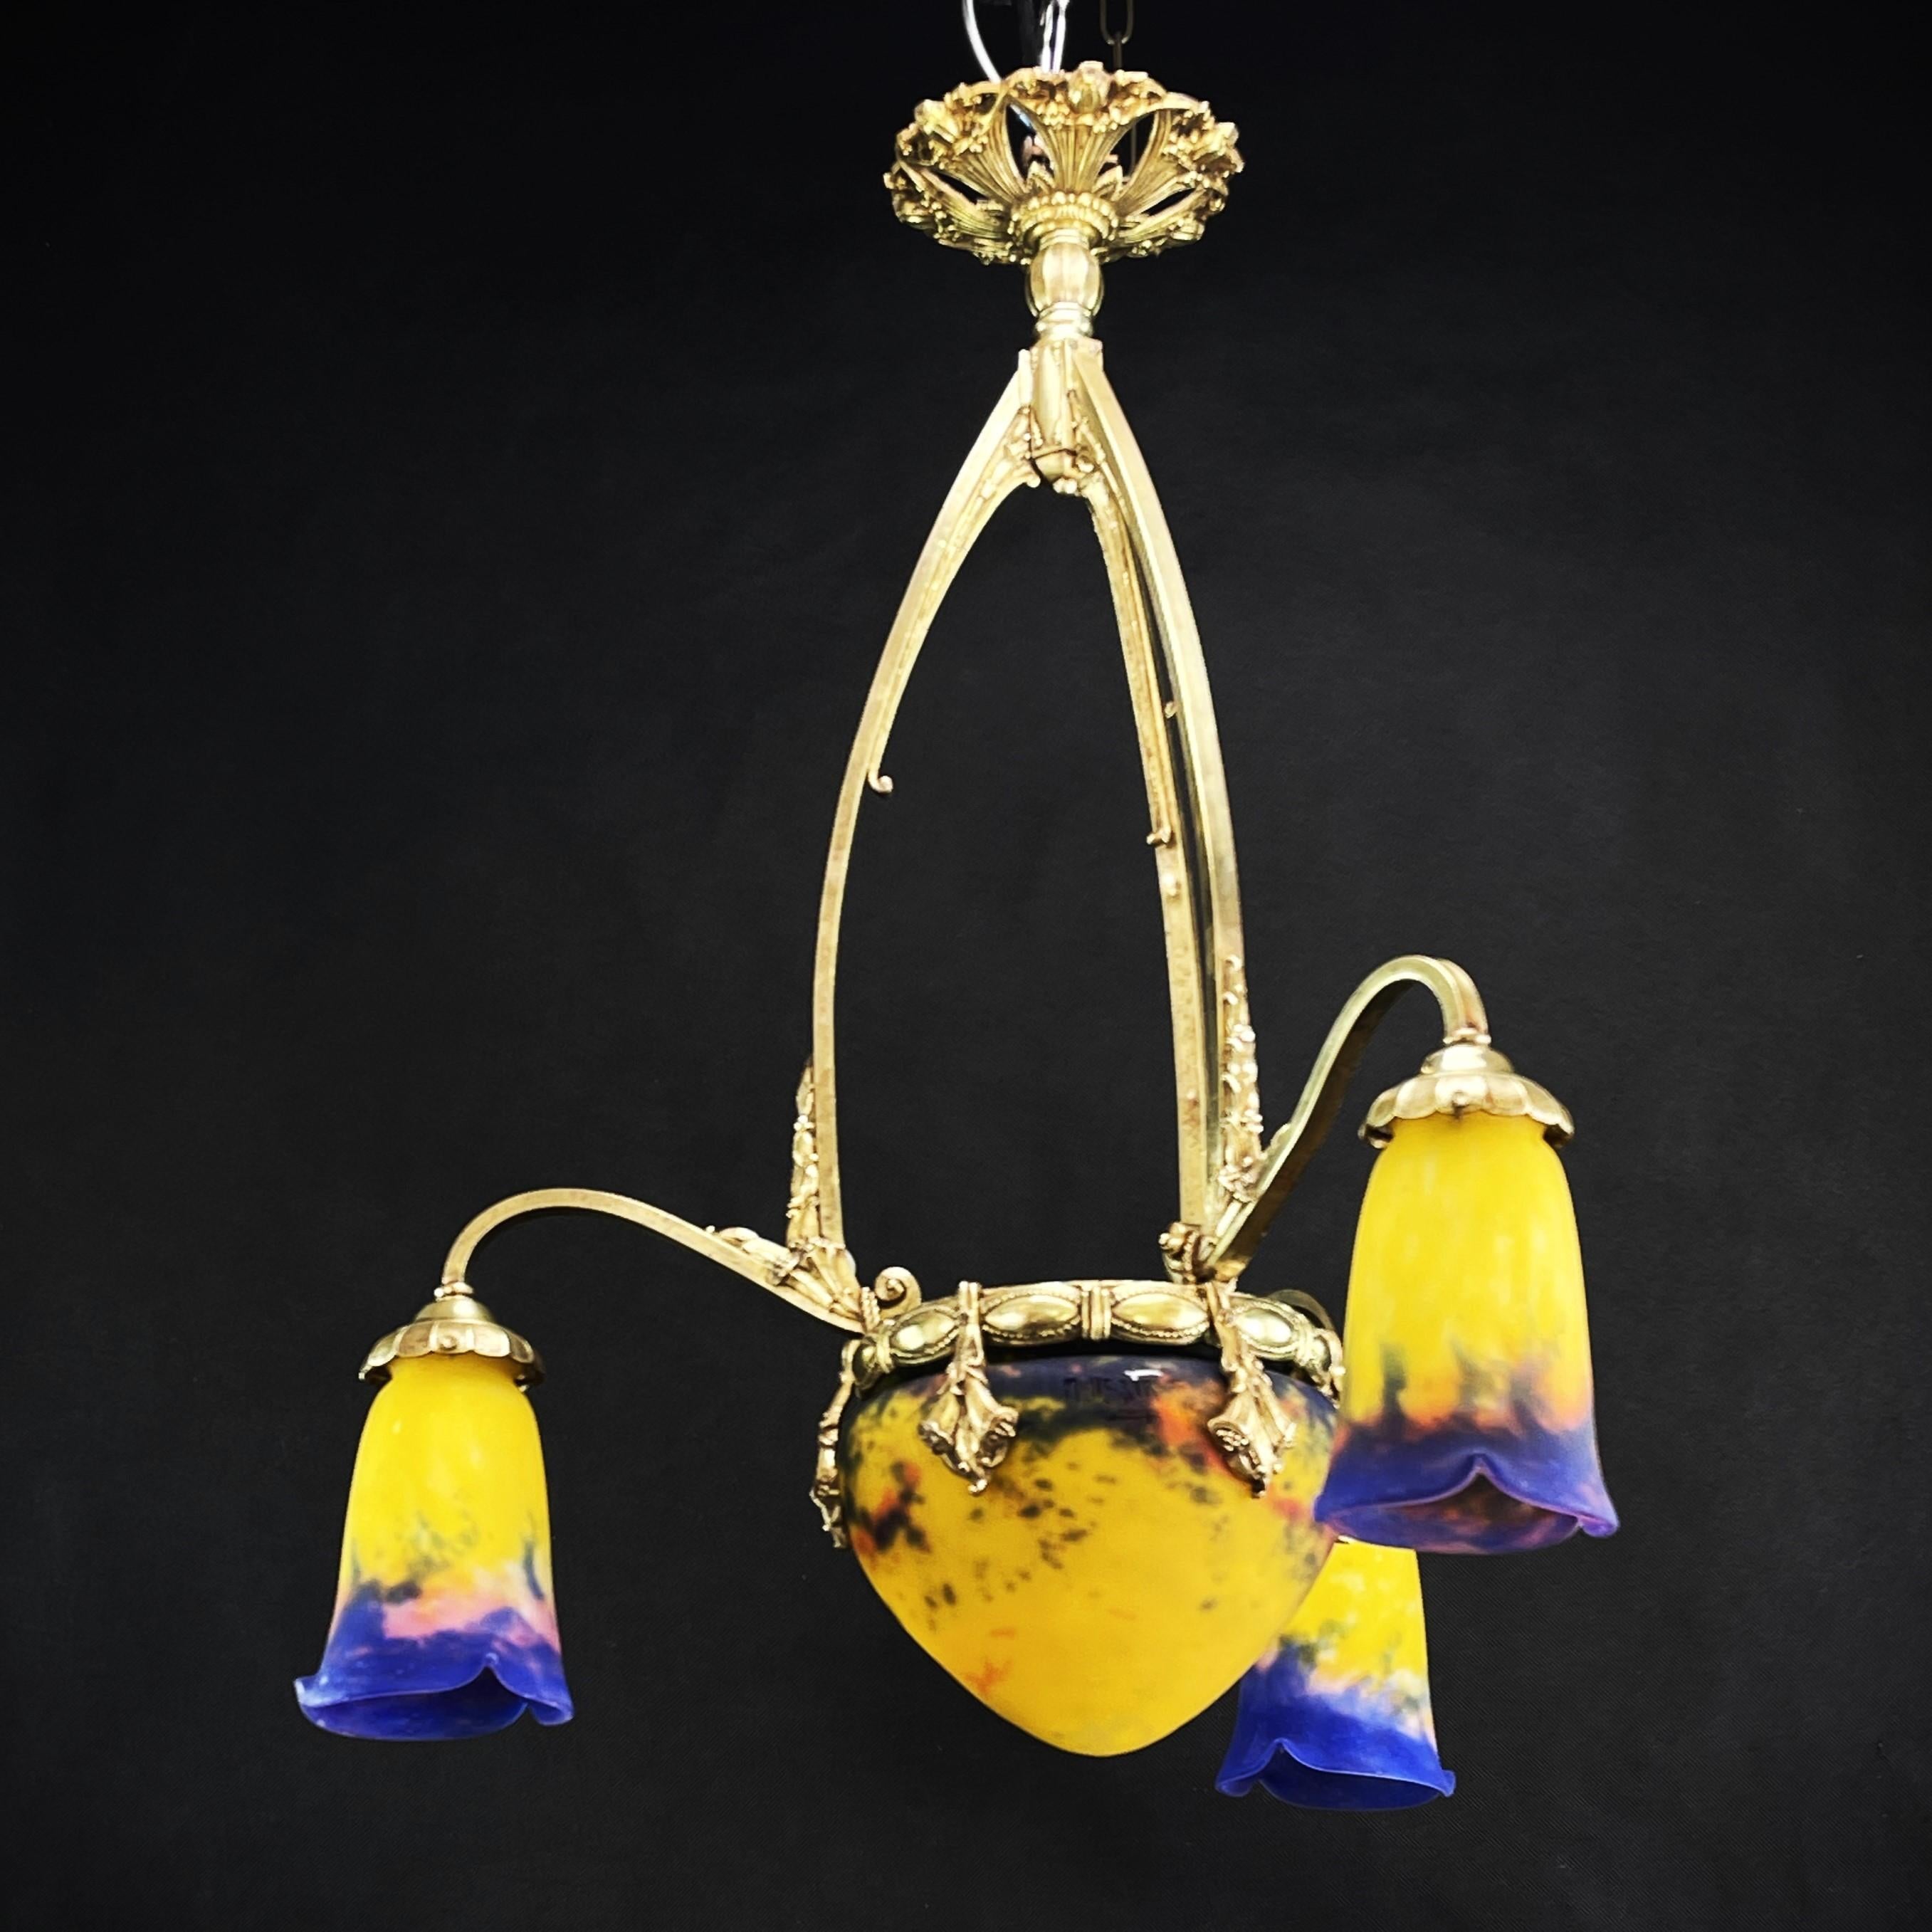 Art Deco Chandelier by Muller Fréres - 1930s

ART DECO ceiling lamp is a remarkable example of craftsmanship and style of the early 20th century. The signature 